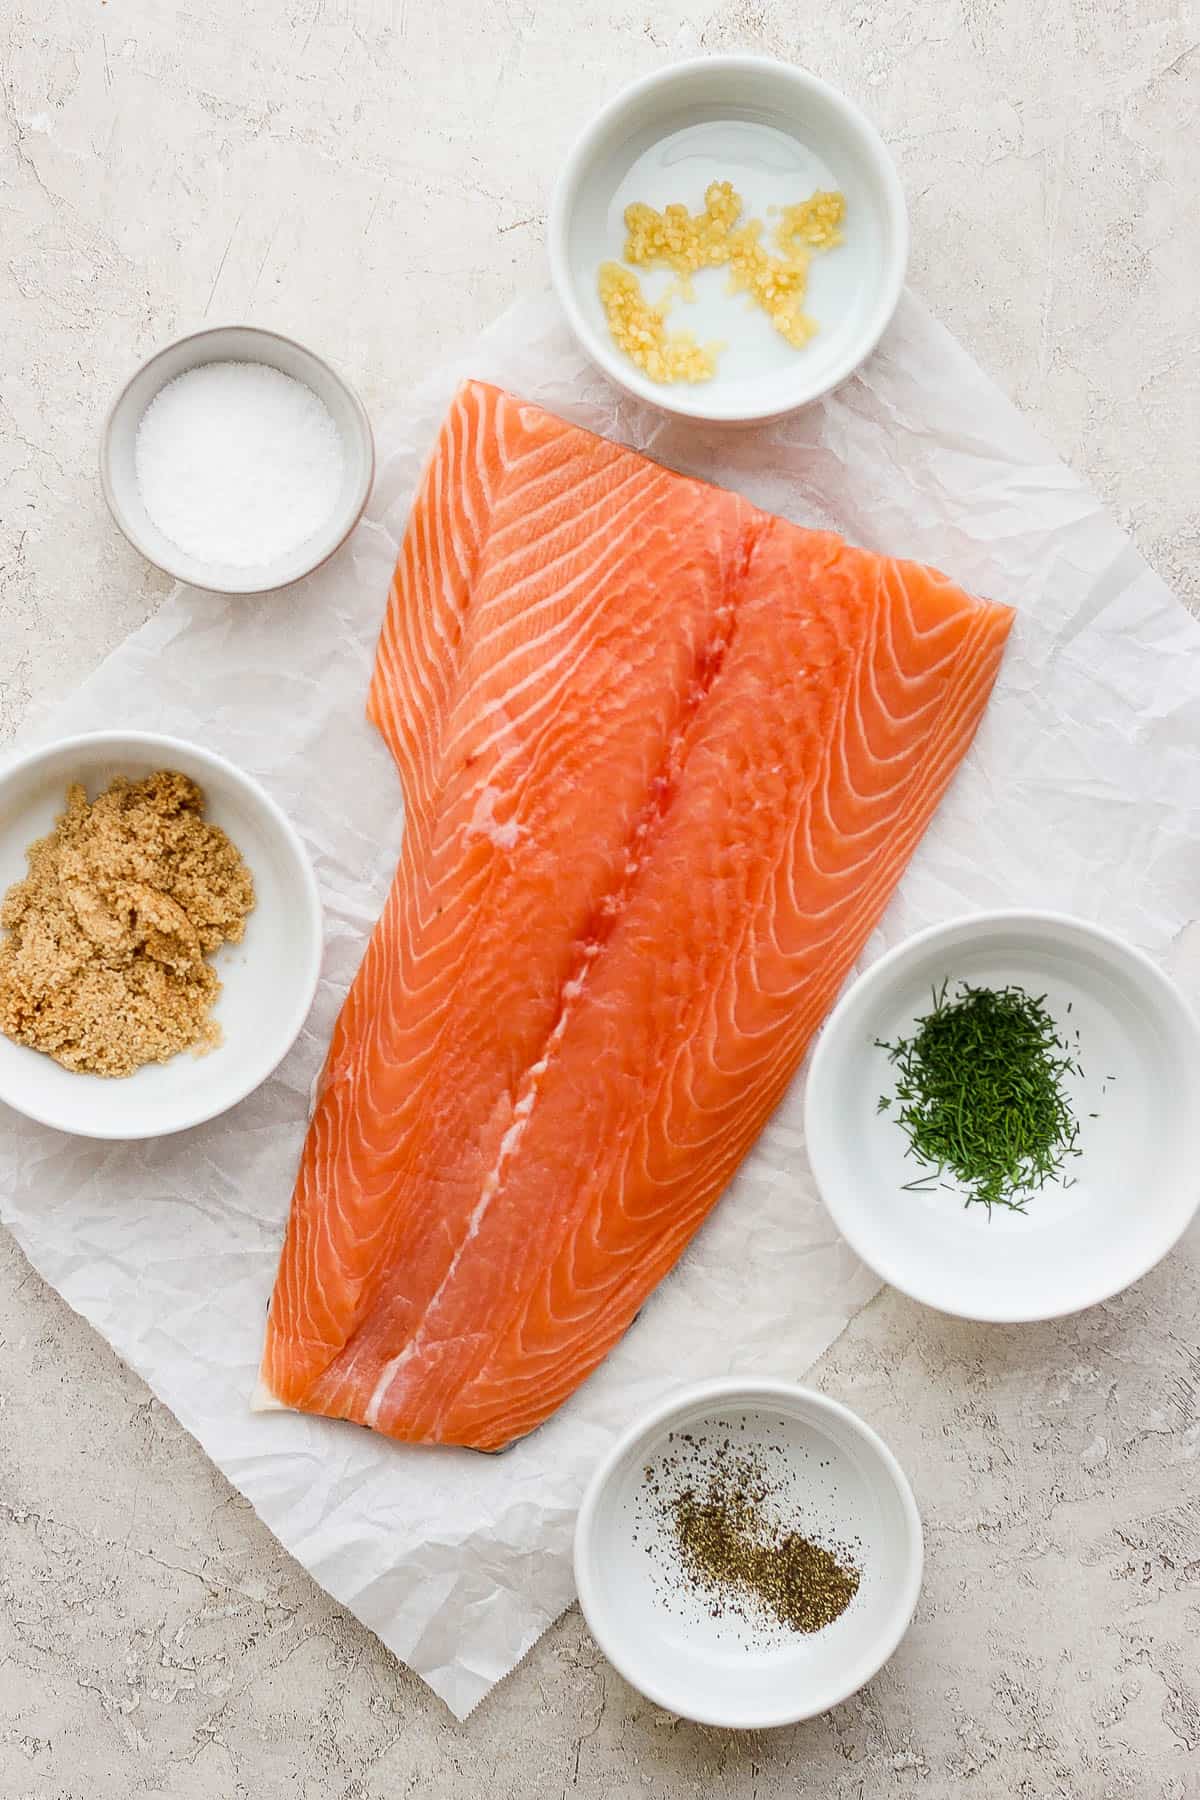 The ingredients for smoked salmon in separate dishes.